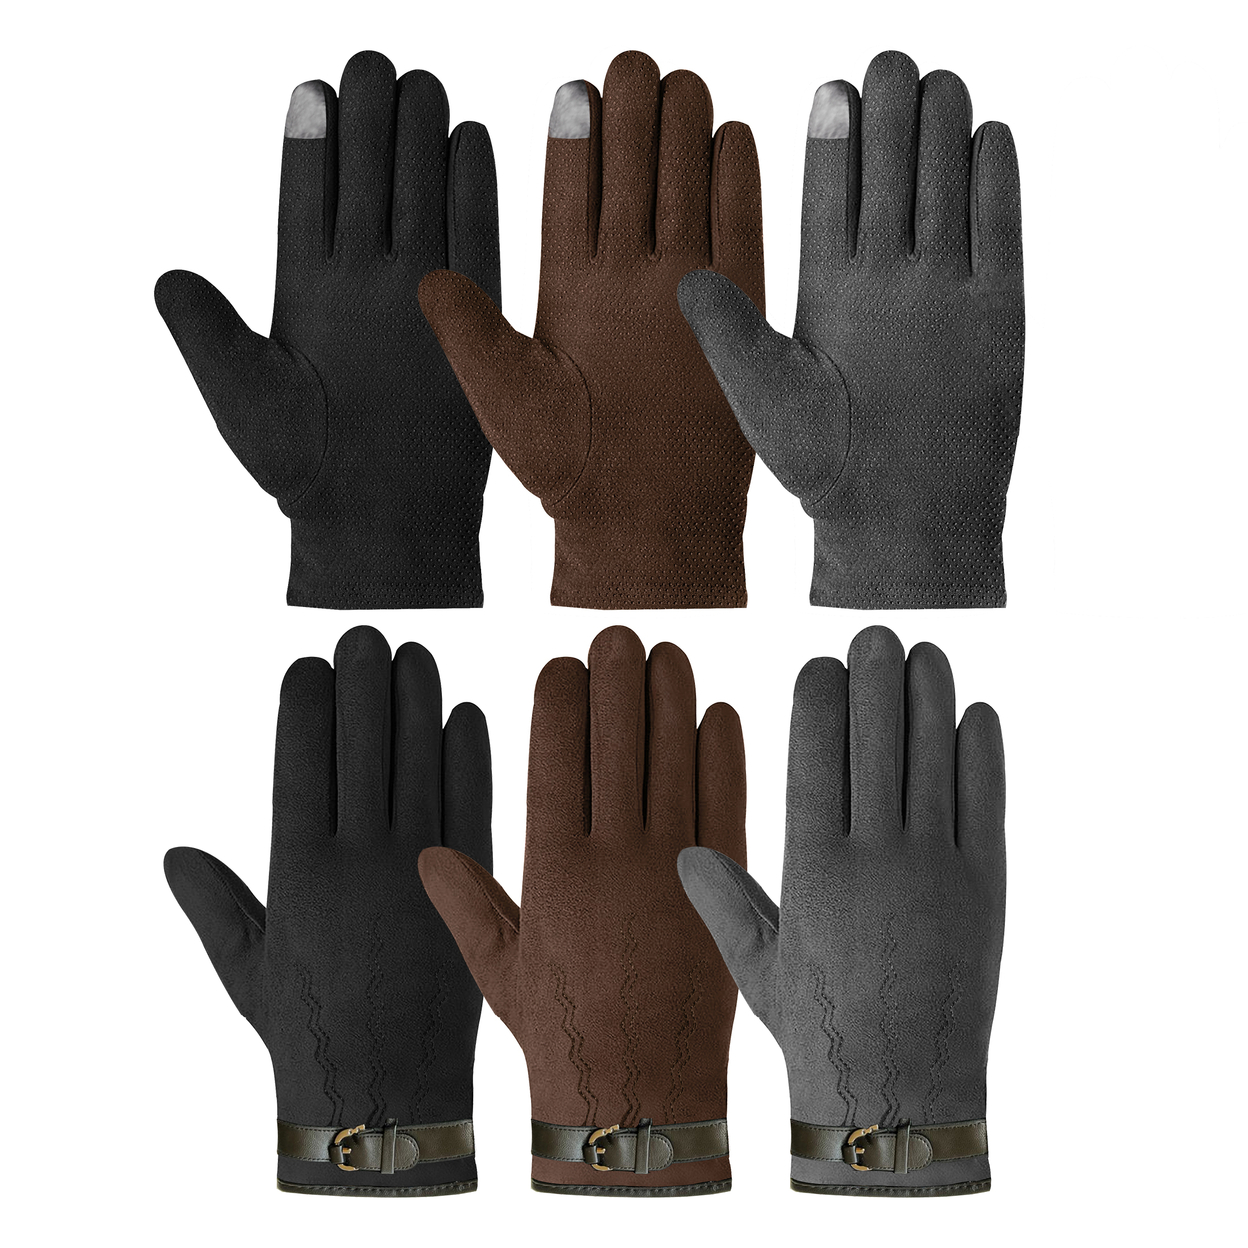 Winter Warm Soft Lining Weather Proof Touchscreen Suede Insulated Gloves - Brown